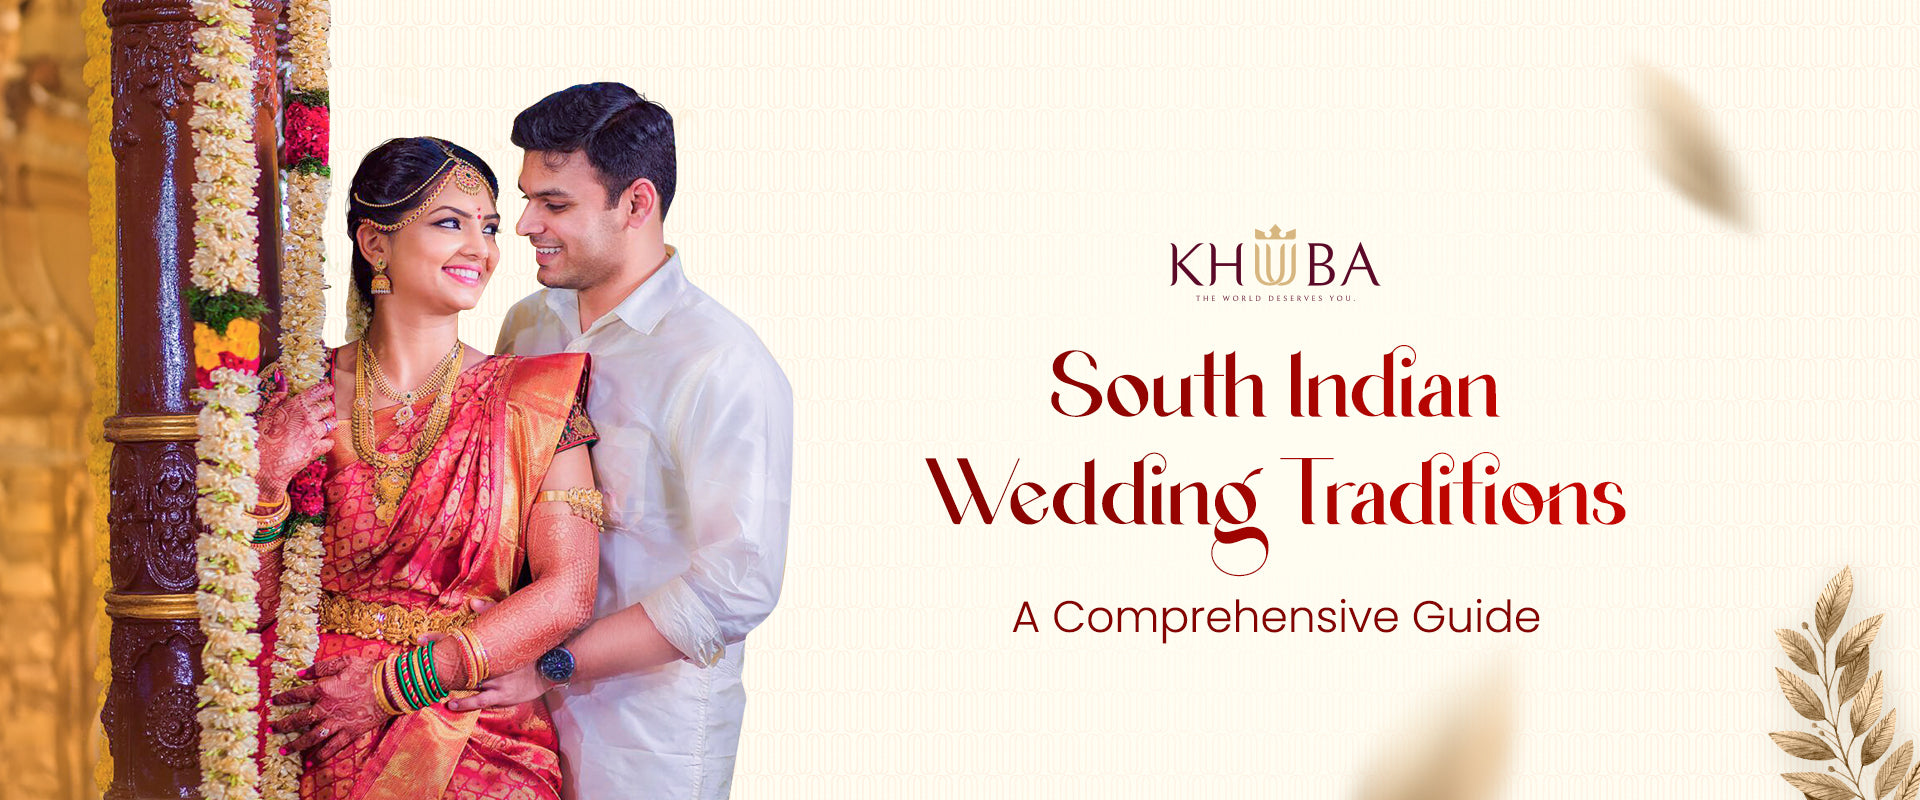 11 Things To Expect When Attending An Indian Wedding